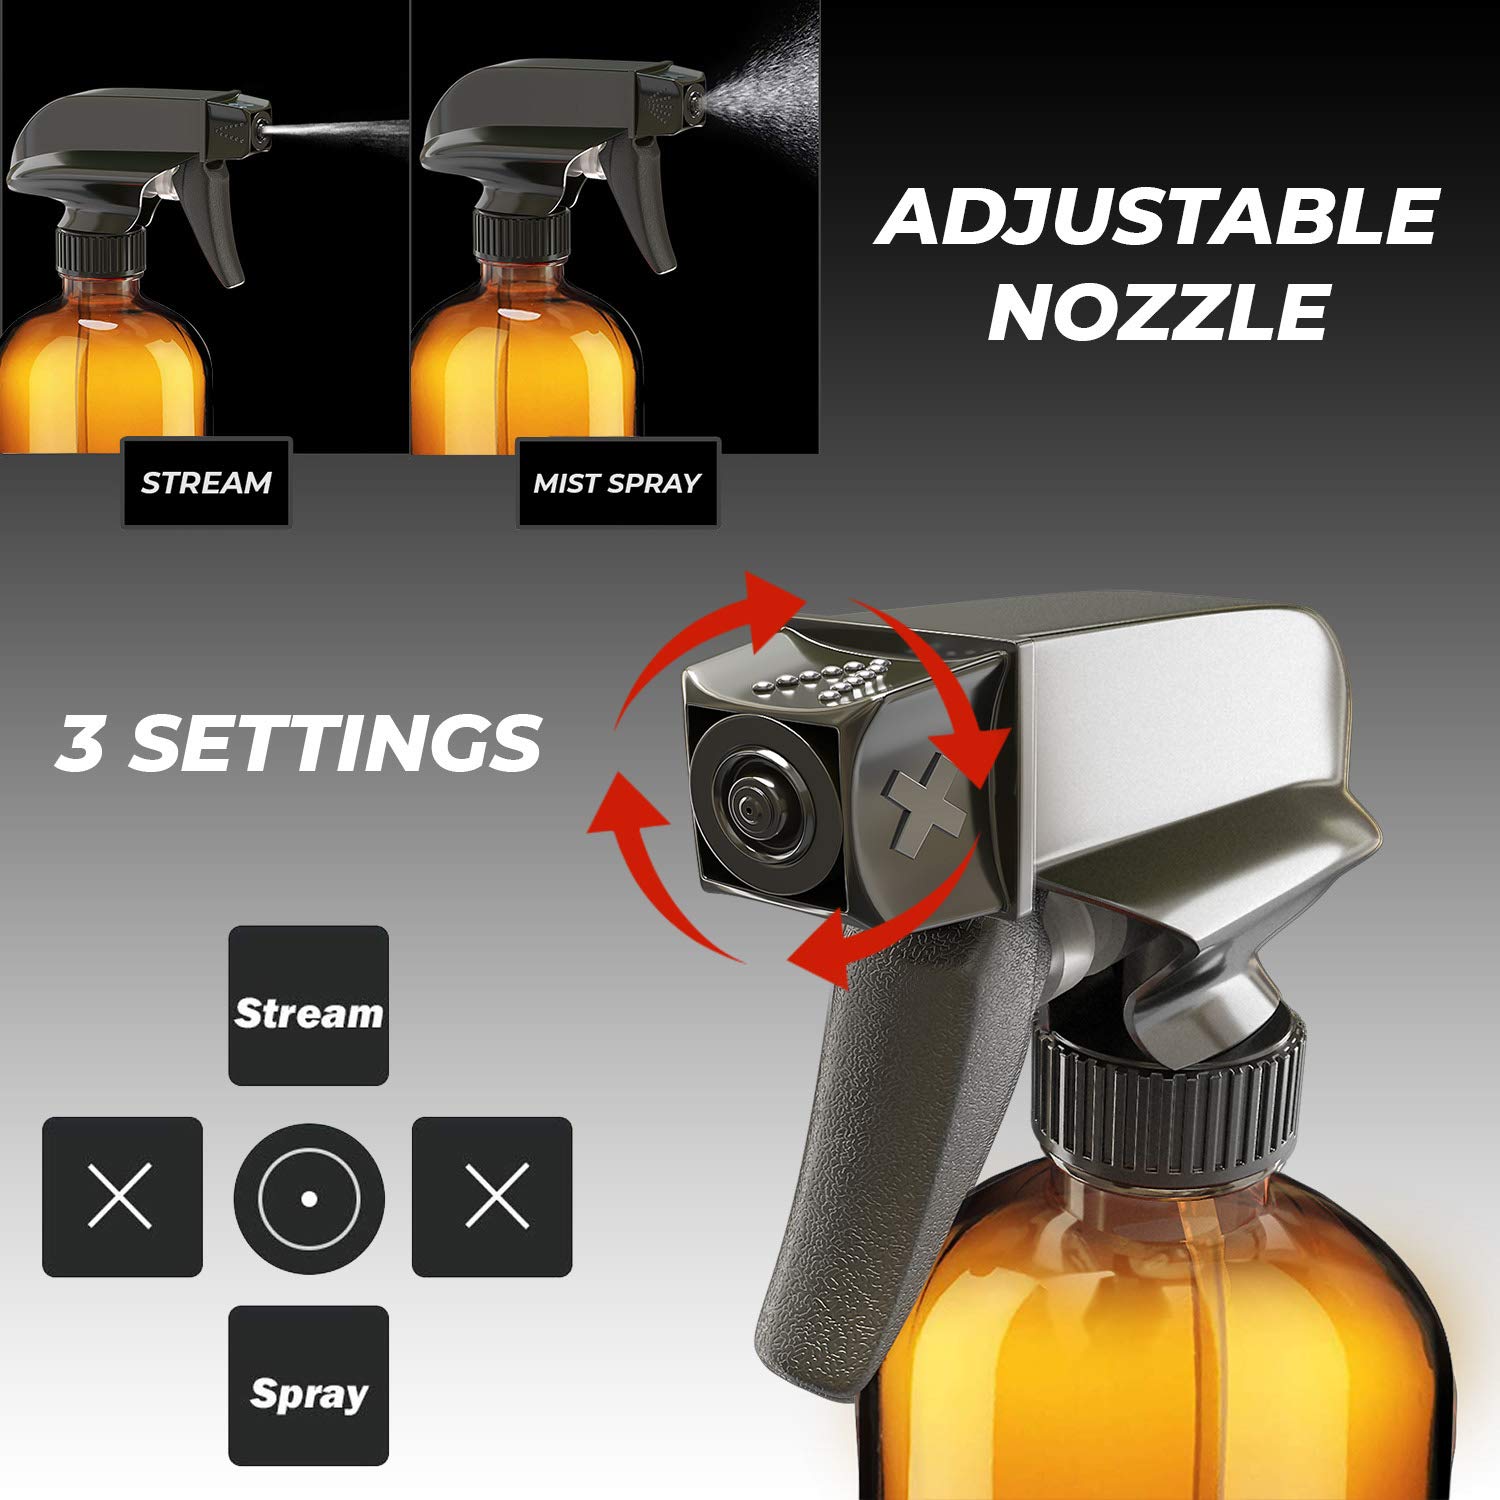 Nylea 3 Pack Glass Spray Bottles (16 OZ) - Durable and Refillable - Amber Spray Bottles for Cleaning Solutions - Essential Oil Spray Bottle with Sturdy Sprayer and Resistant Nozzle